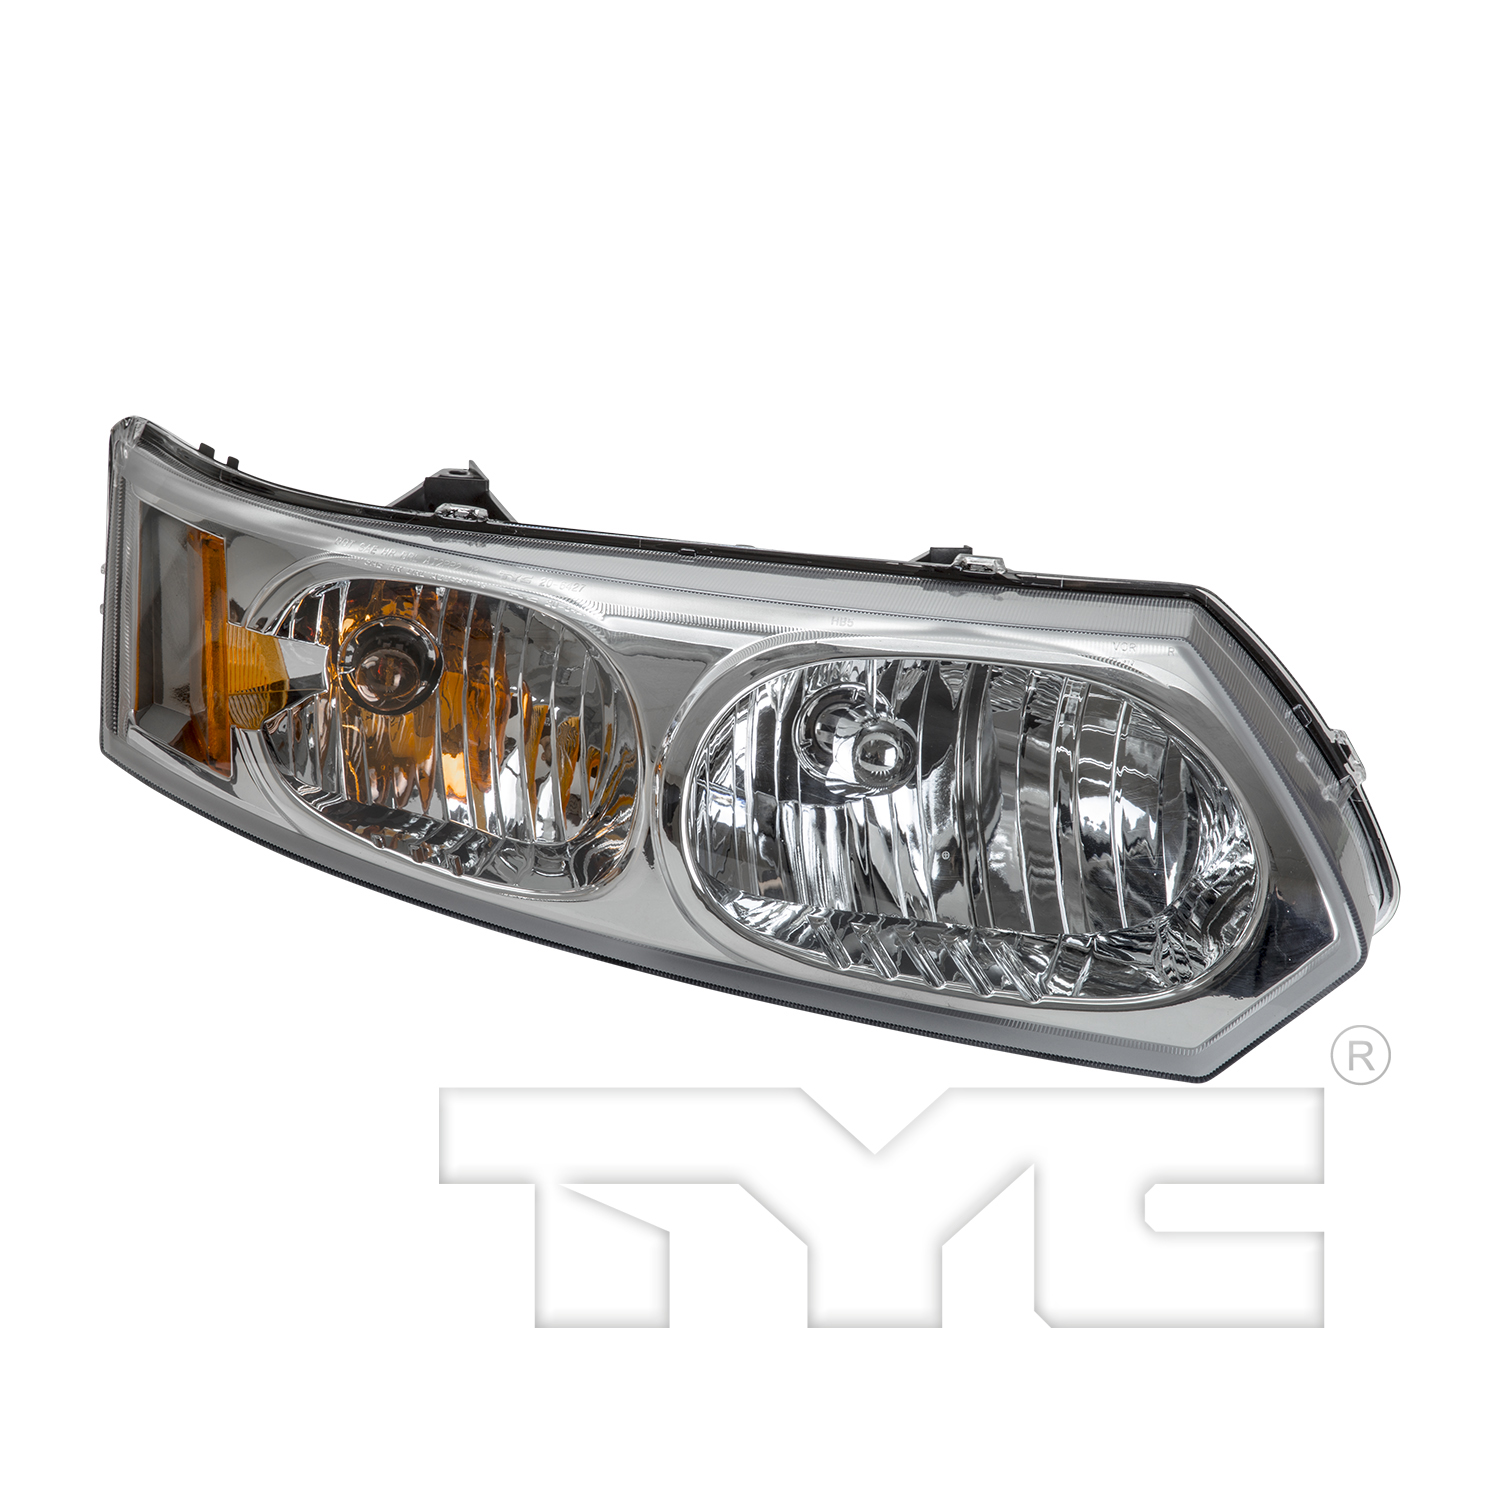 Aftermarket HEADLIGHTS for SATURN - ION, ION,03-07,RT Headlamp assy composite